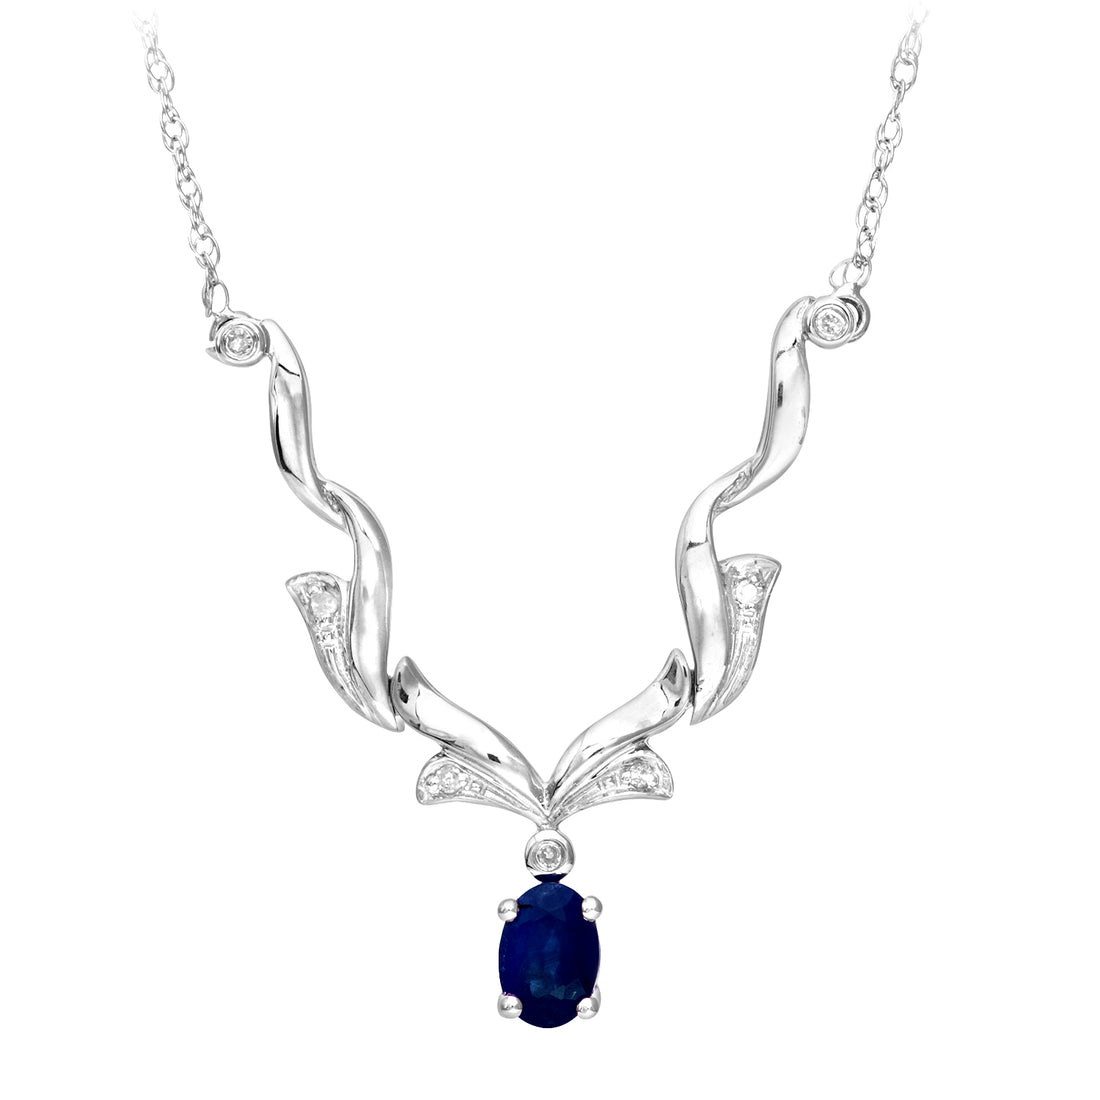 9ct White Gold Diamond and Sapphire Ladies Necklace